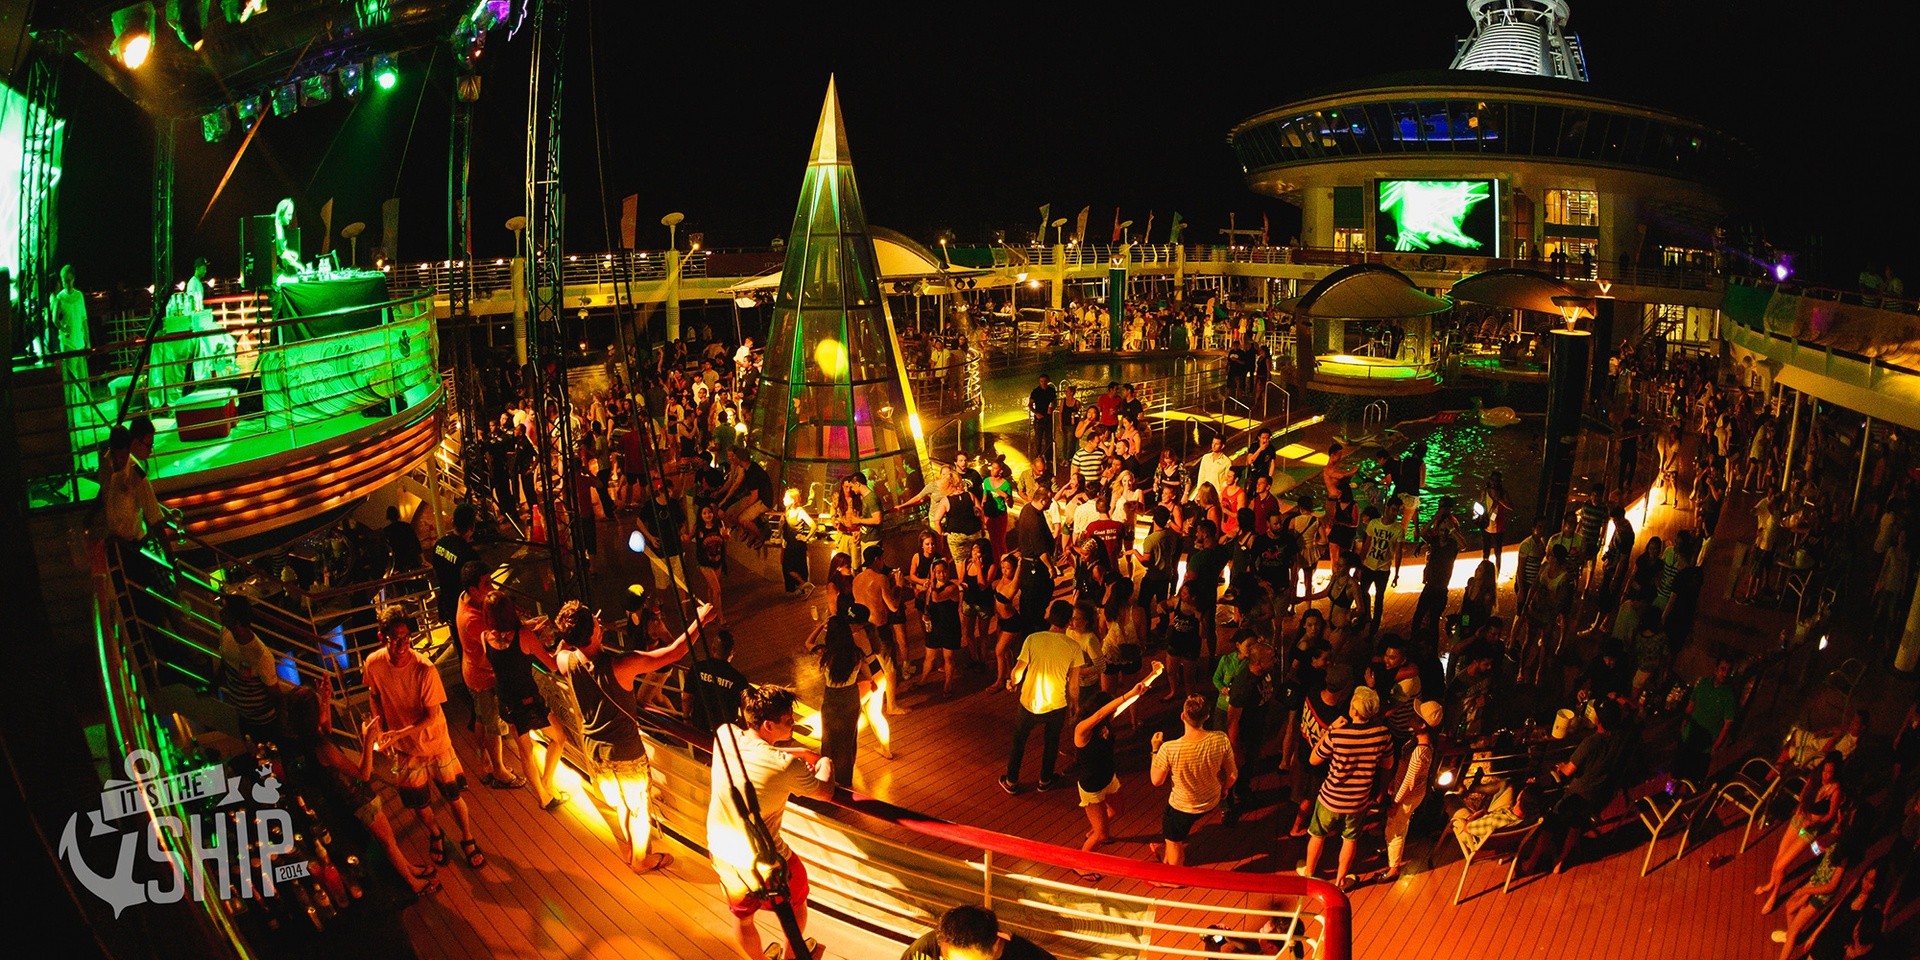 It's The Ship now accepting entries to DJ on "Asia's Largest Music Festival At Sea"